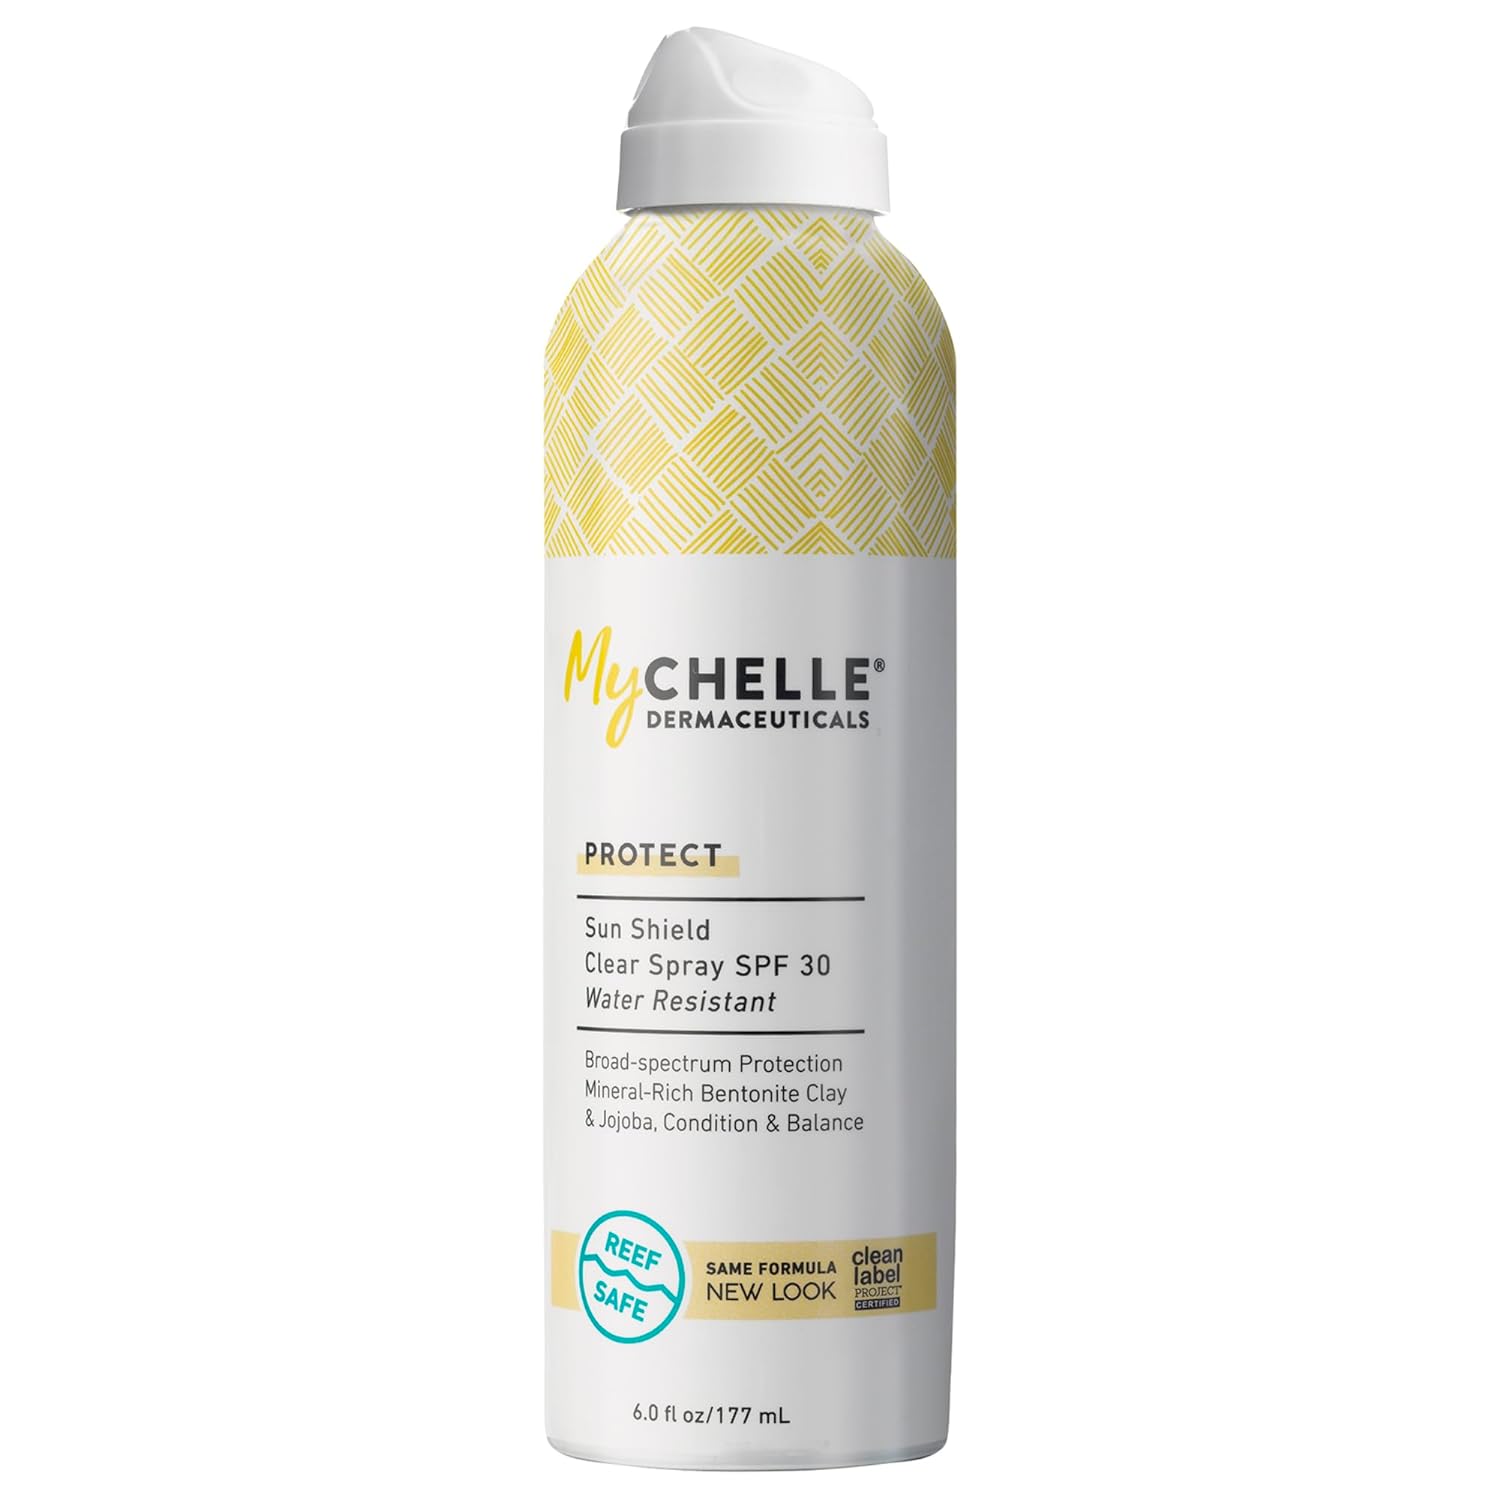 MyChelle Dermaceuticals Sun Shield Clear Spray SPF 30 (6 Fl Oz) - Zinc Sunscreen Spray with Bentonite Clay and Jojoba - Balances Oil Levels and Conditions Skin - Water Resistant for 80 Minutes